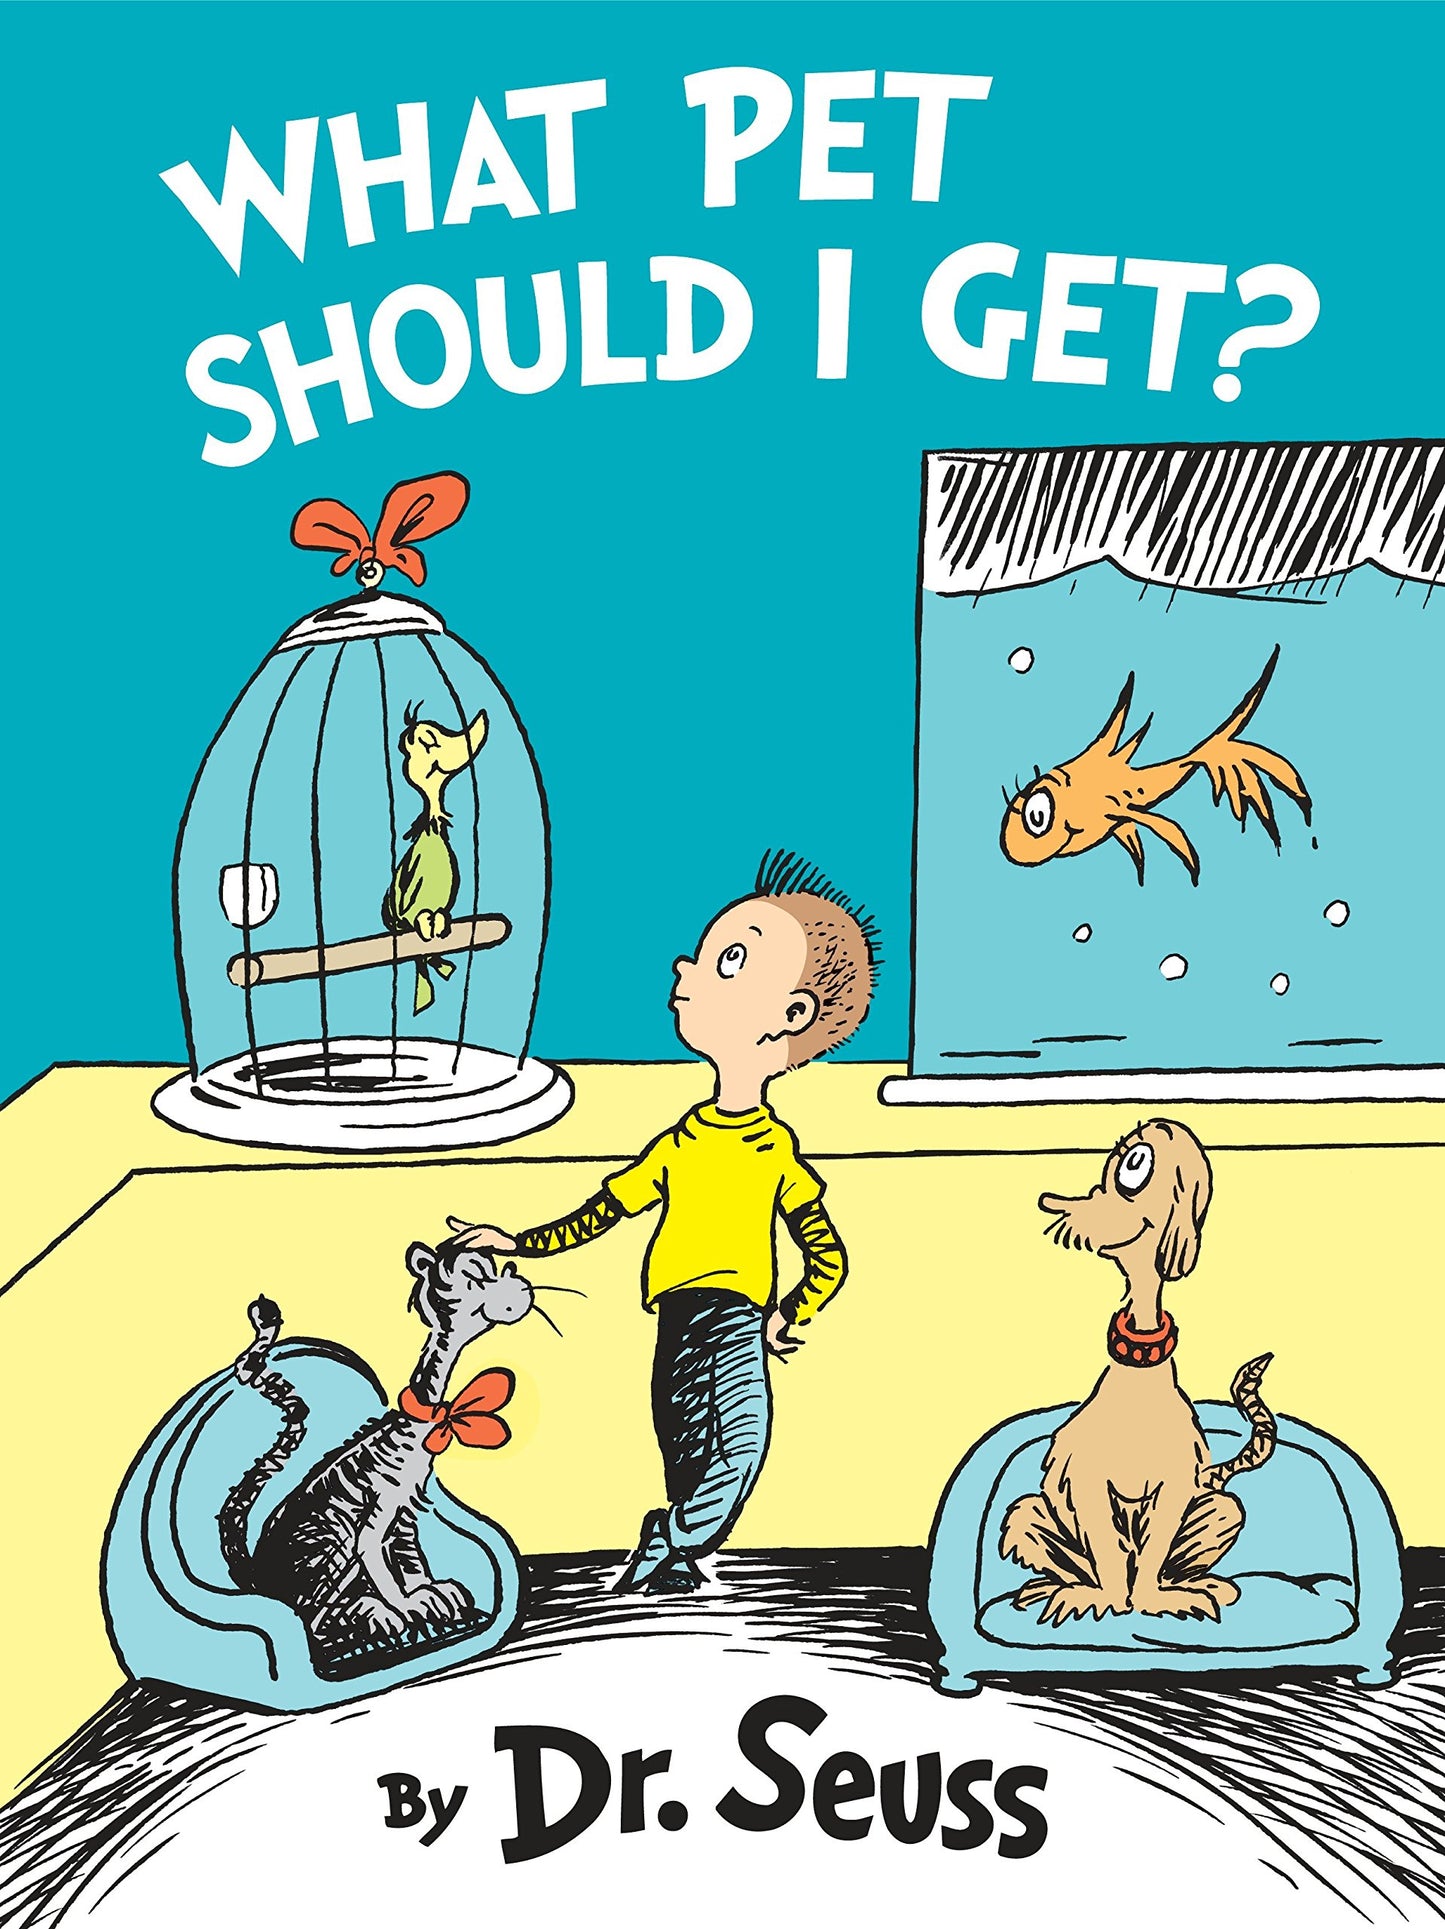 What Pet Should I Get? by Dr. Suess